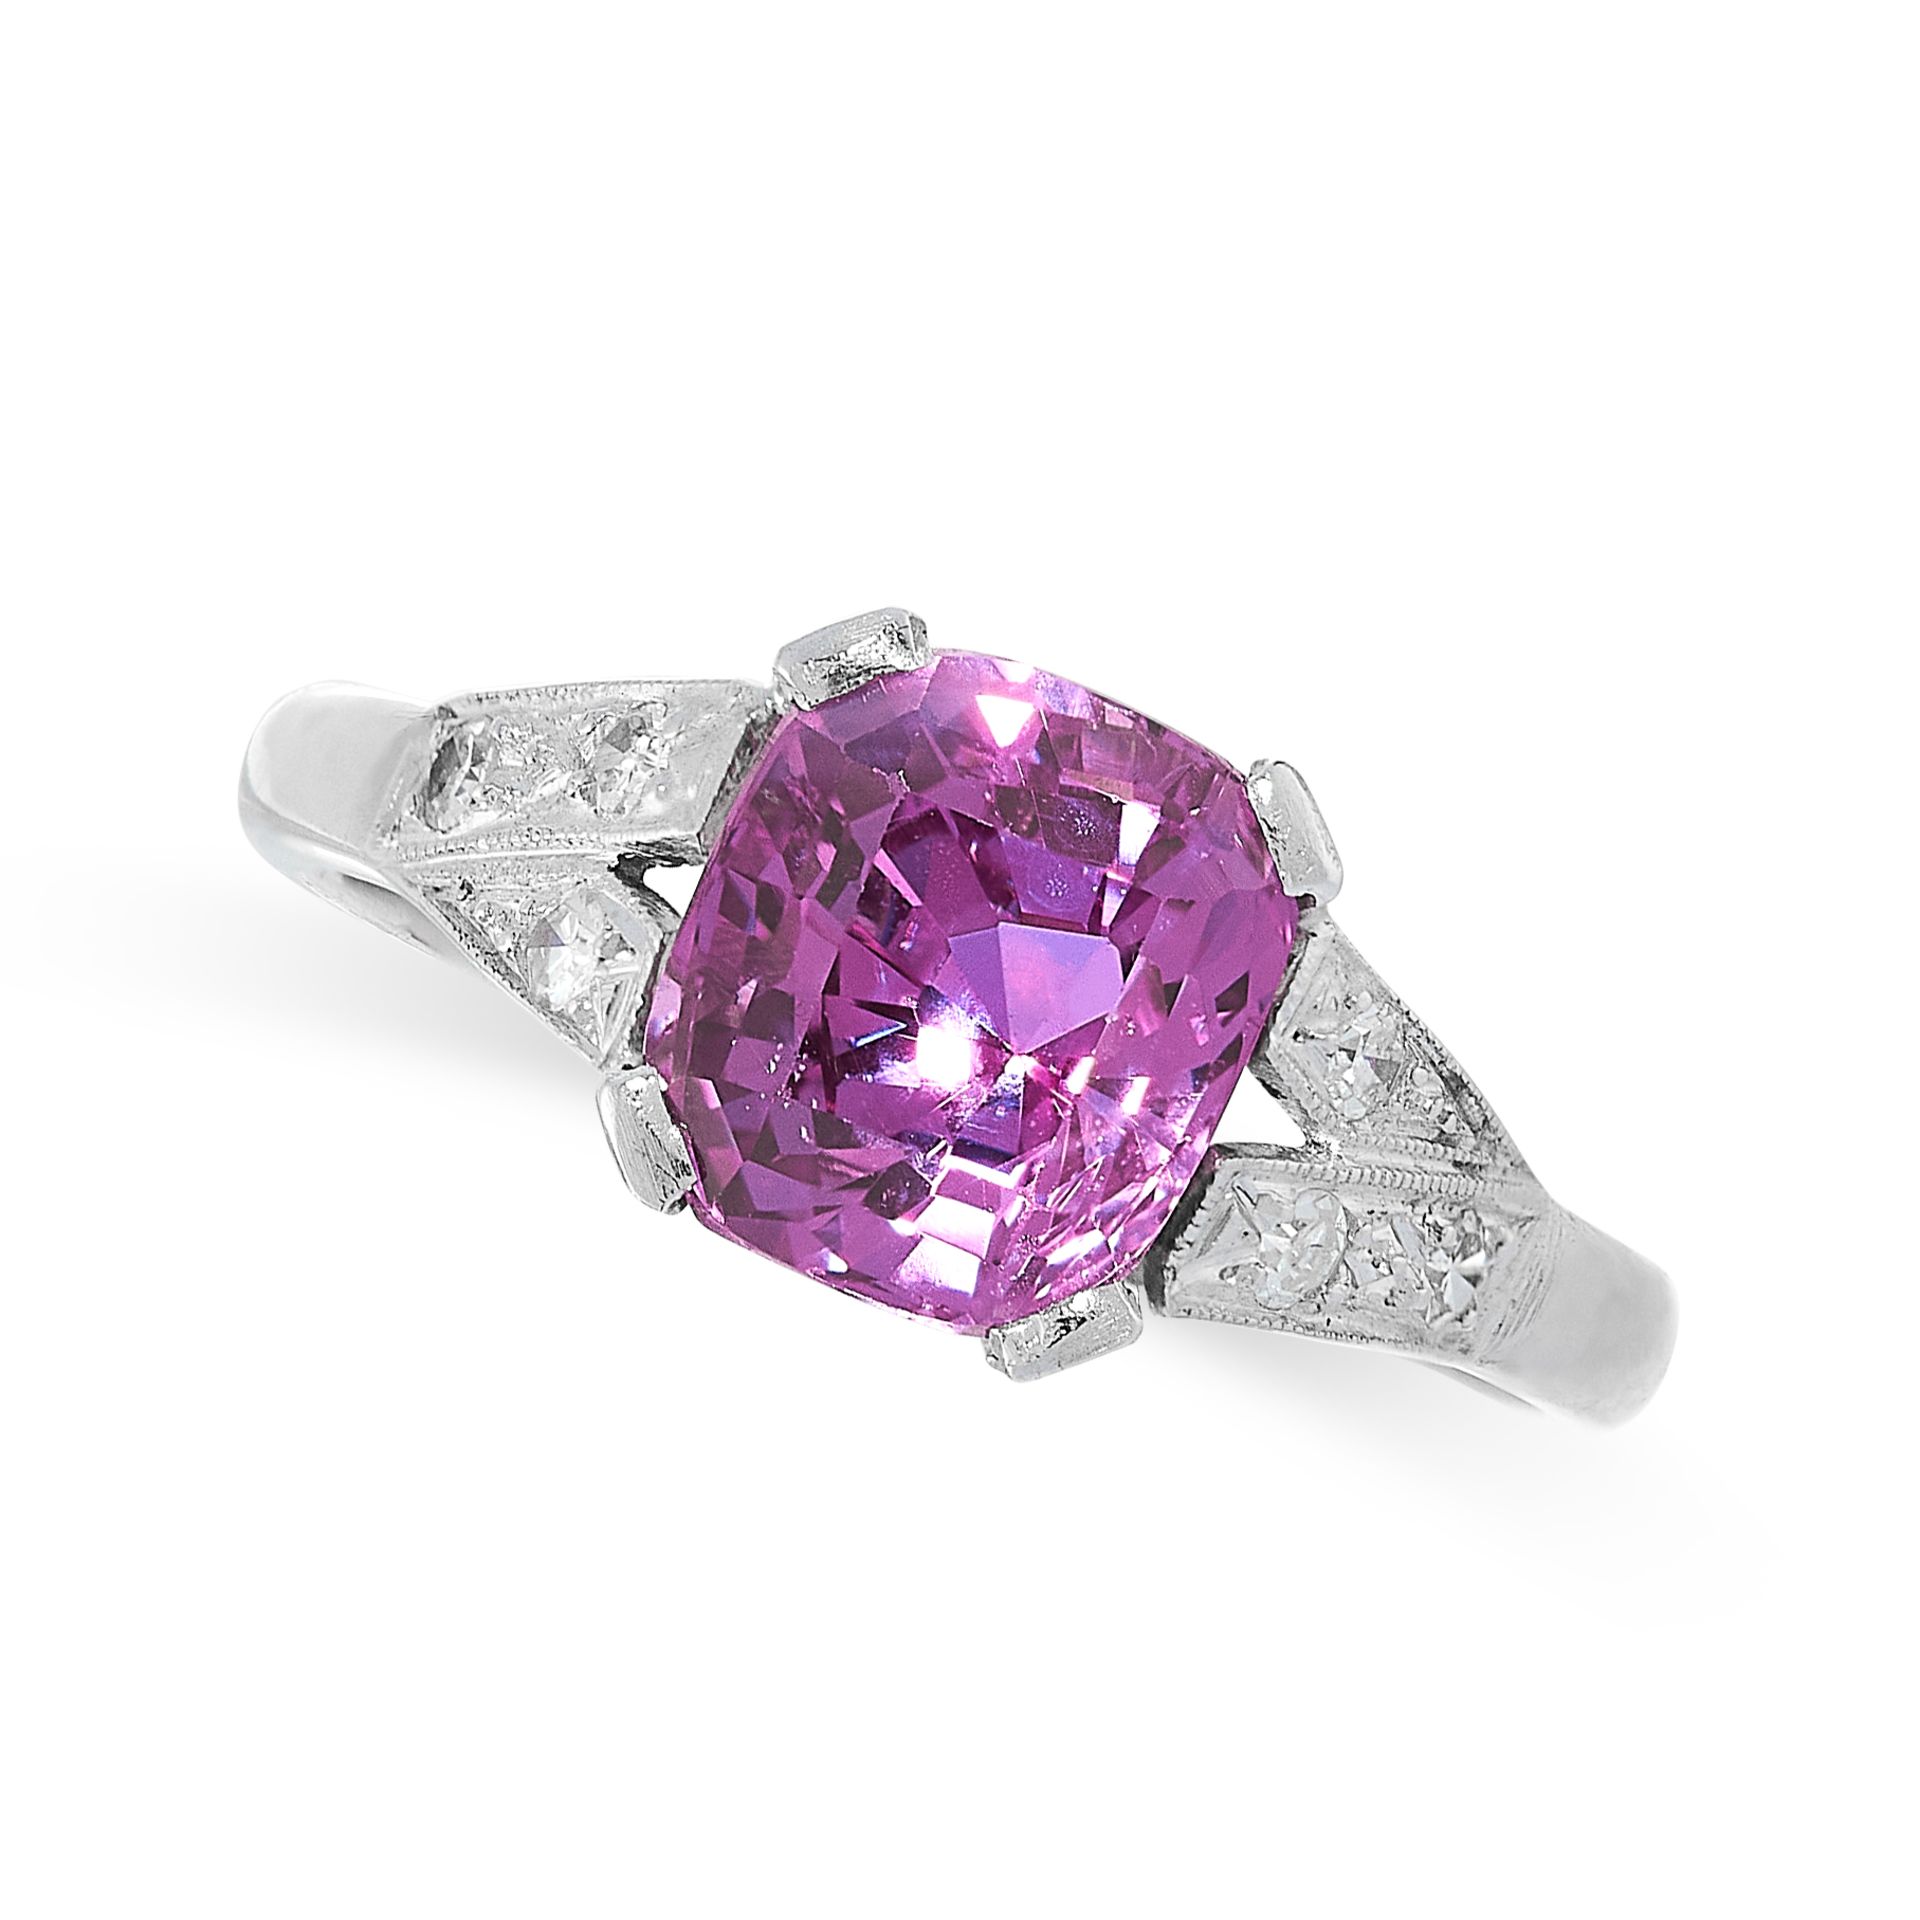 UNHEATED PINK SAPPHIRE AND DIAMOND RING claw-set with an octagonal mixed-cut pink sapphire